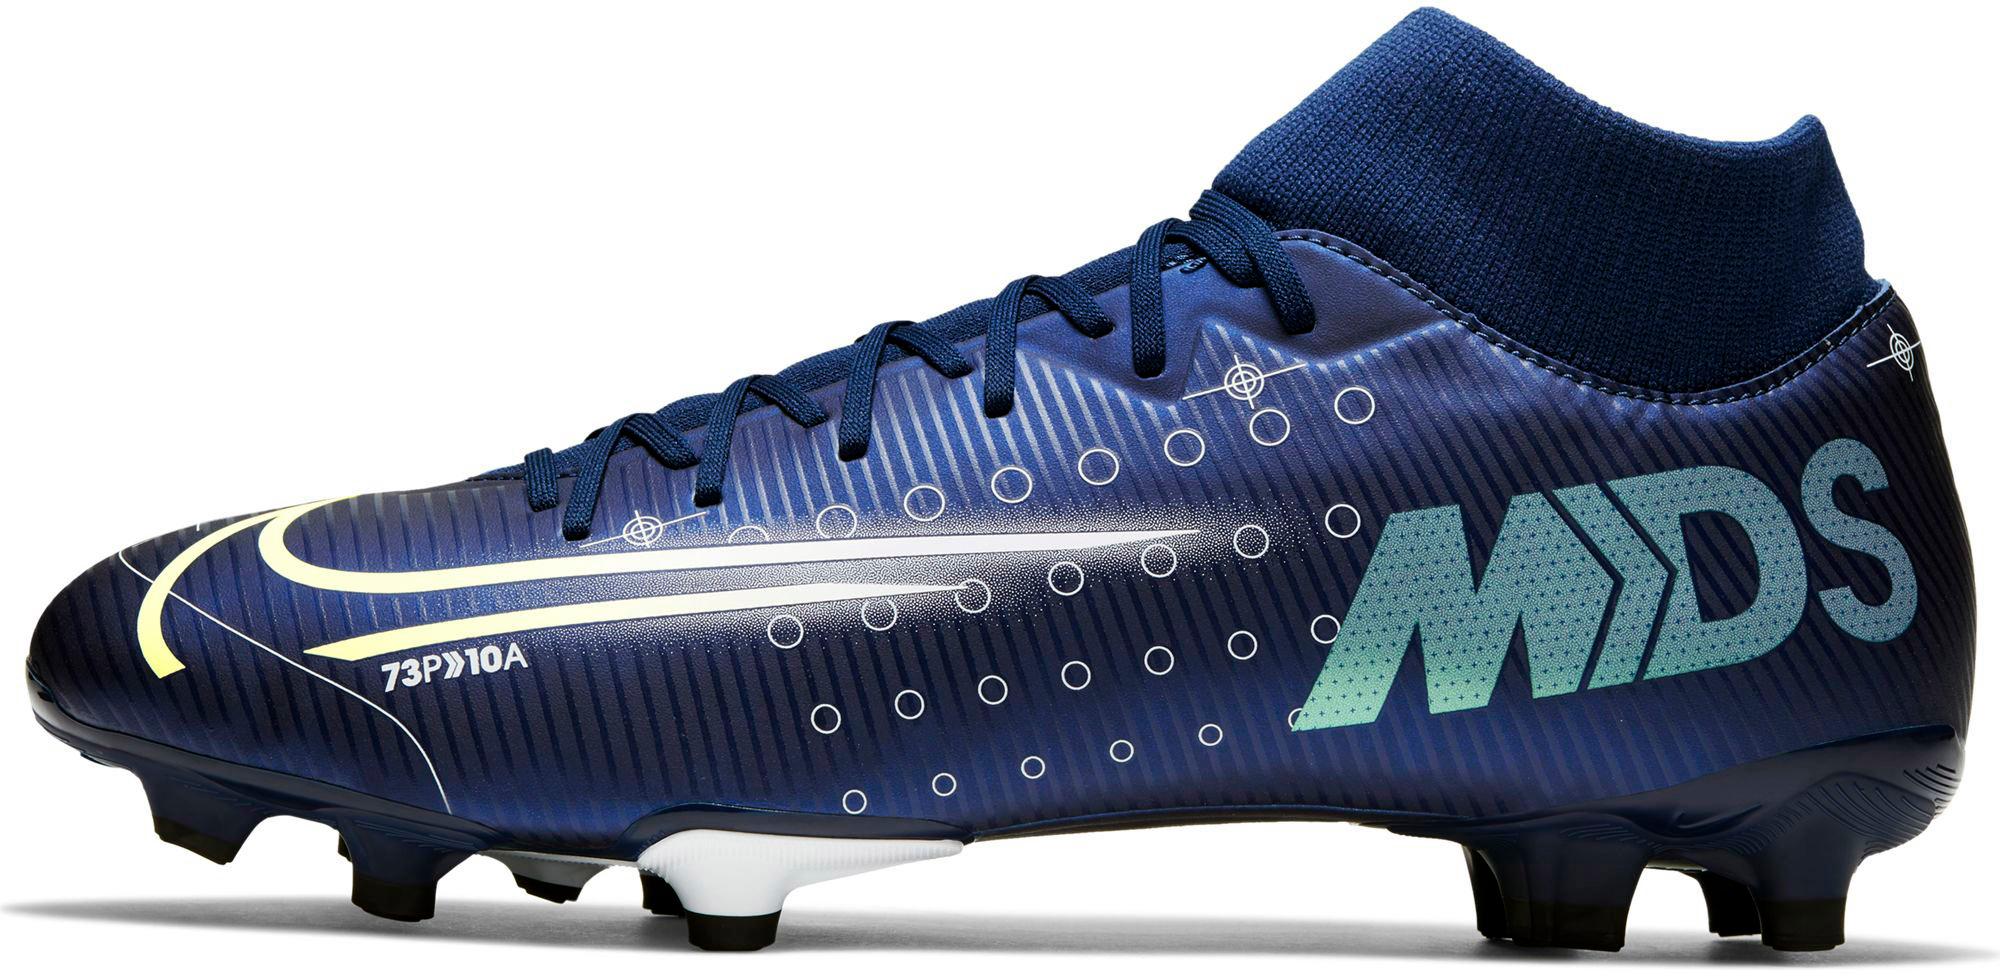 Details about Nike Mercurial Superfly 7 Academy MDS HG.